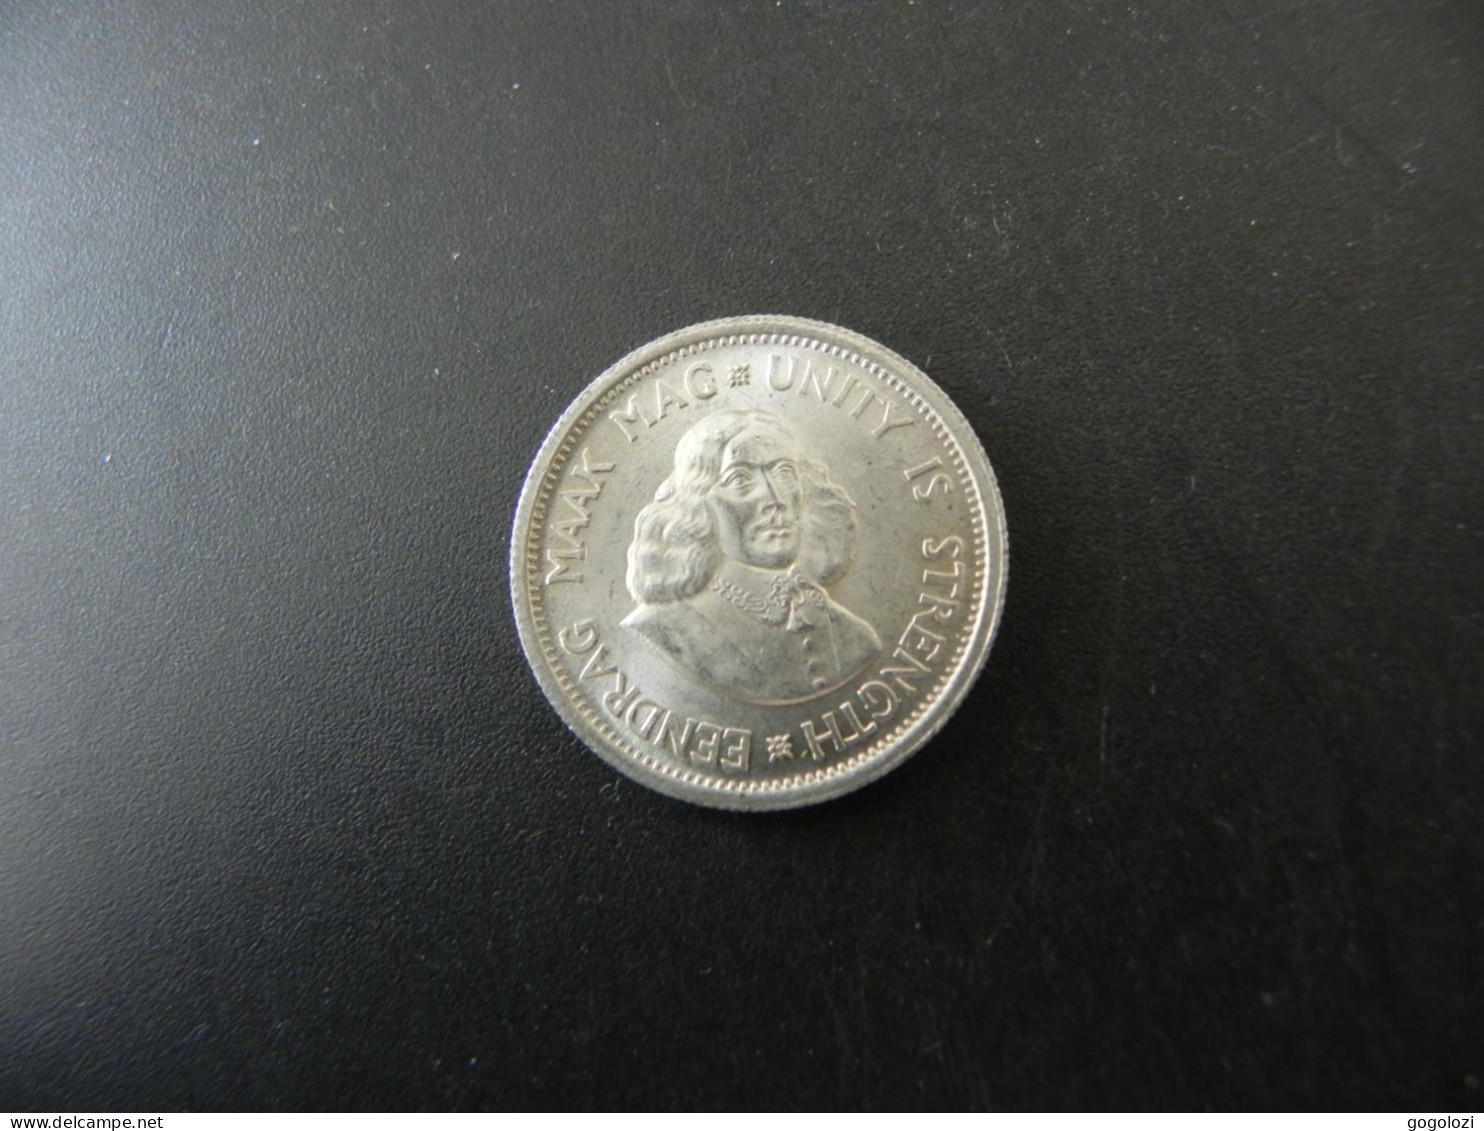 South Africa 10 Cents 1964 Silver - South Africa